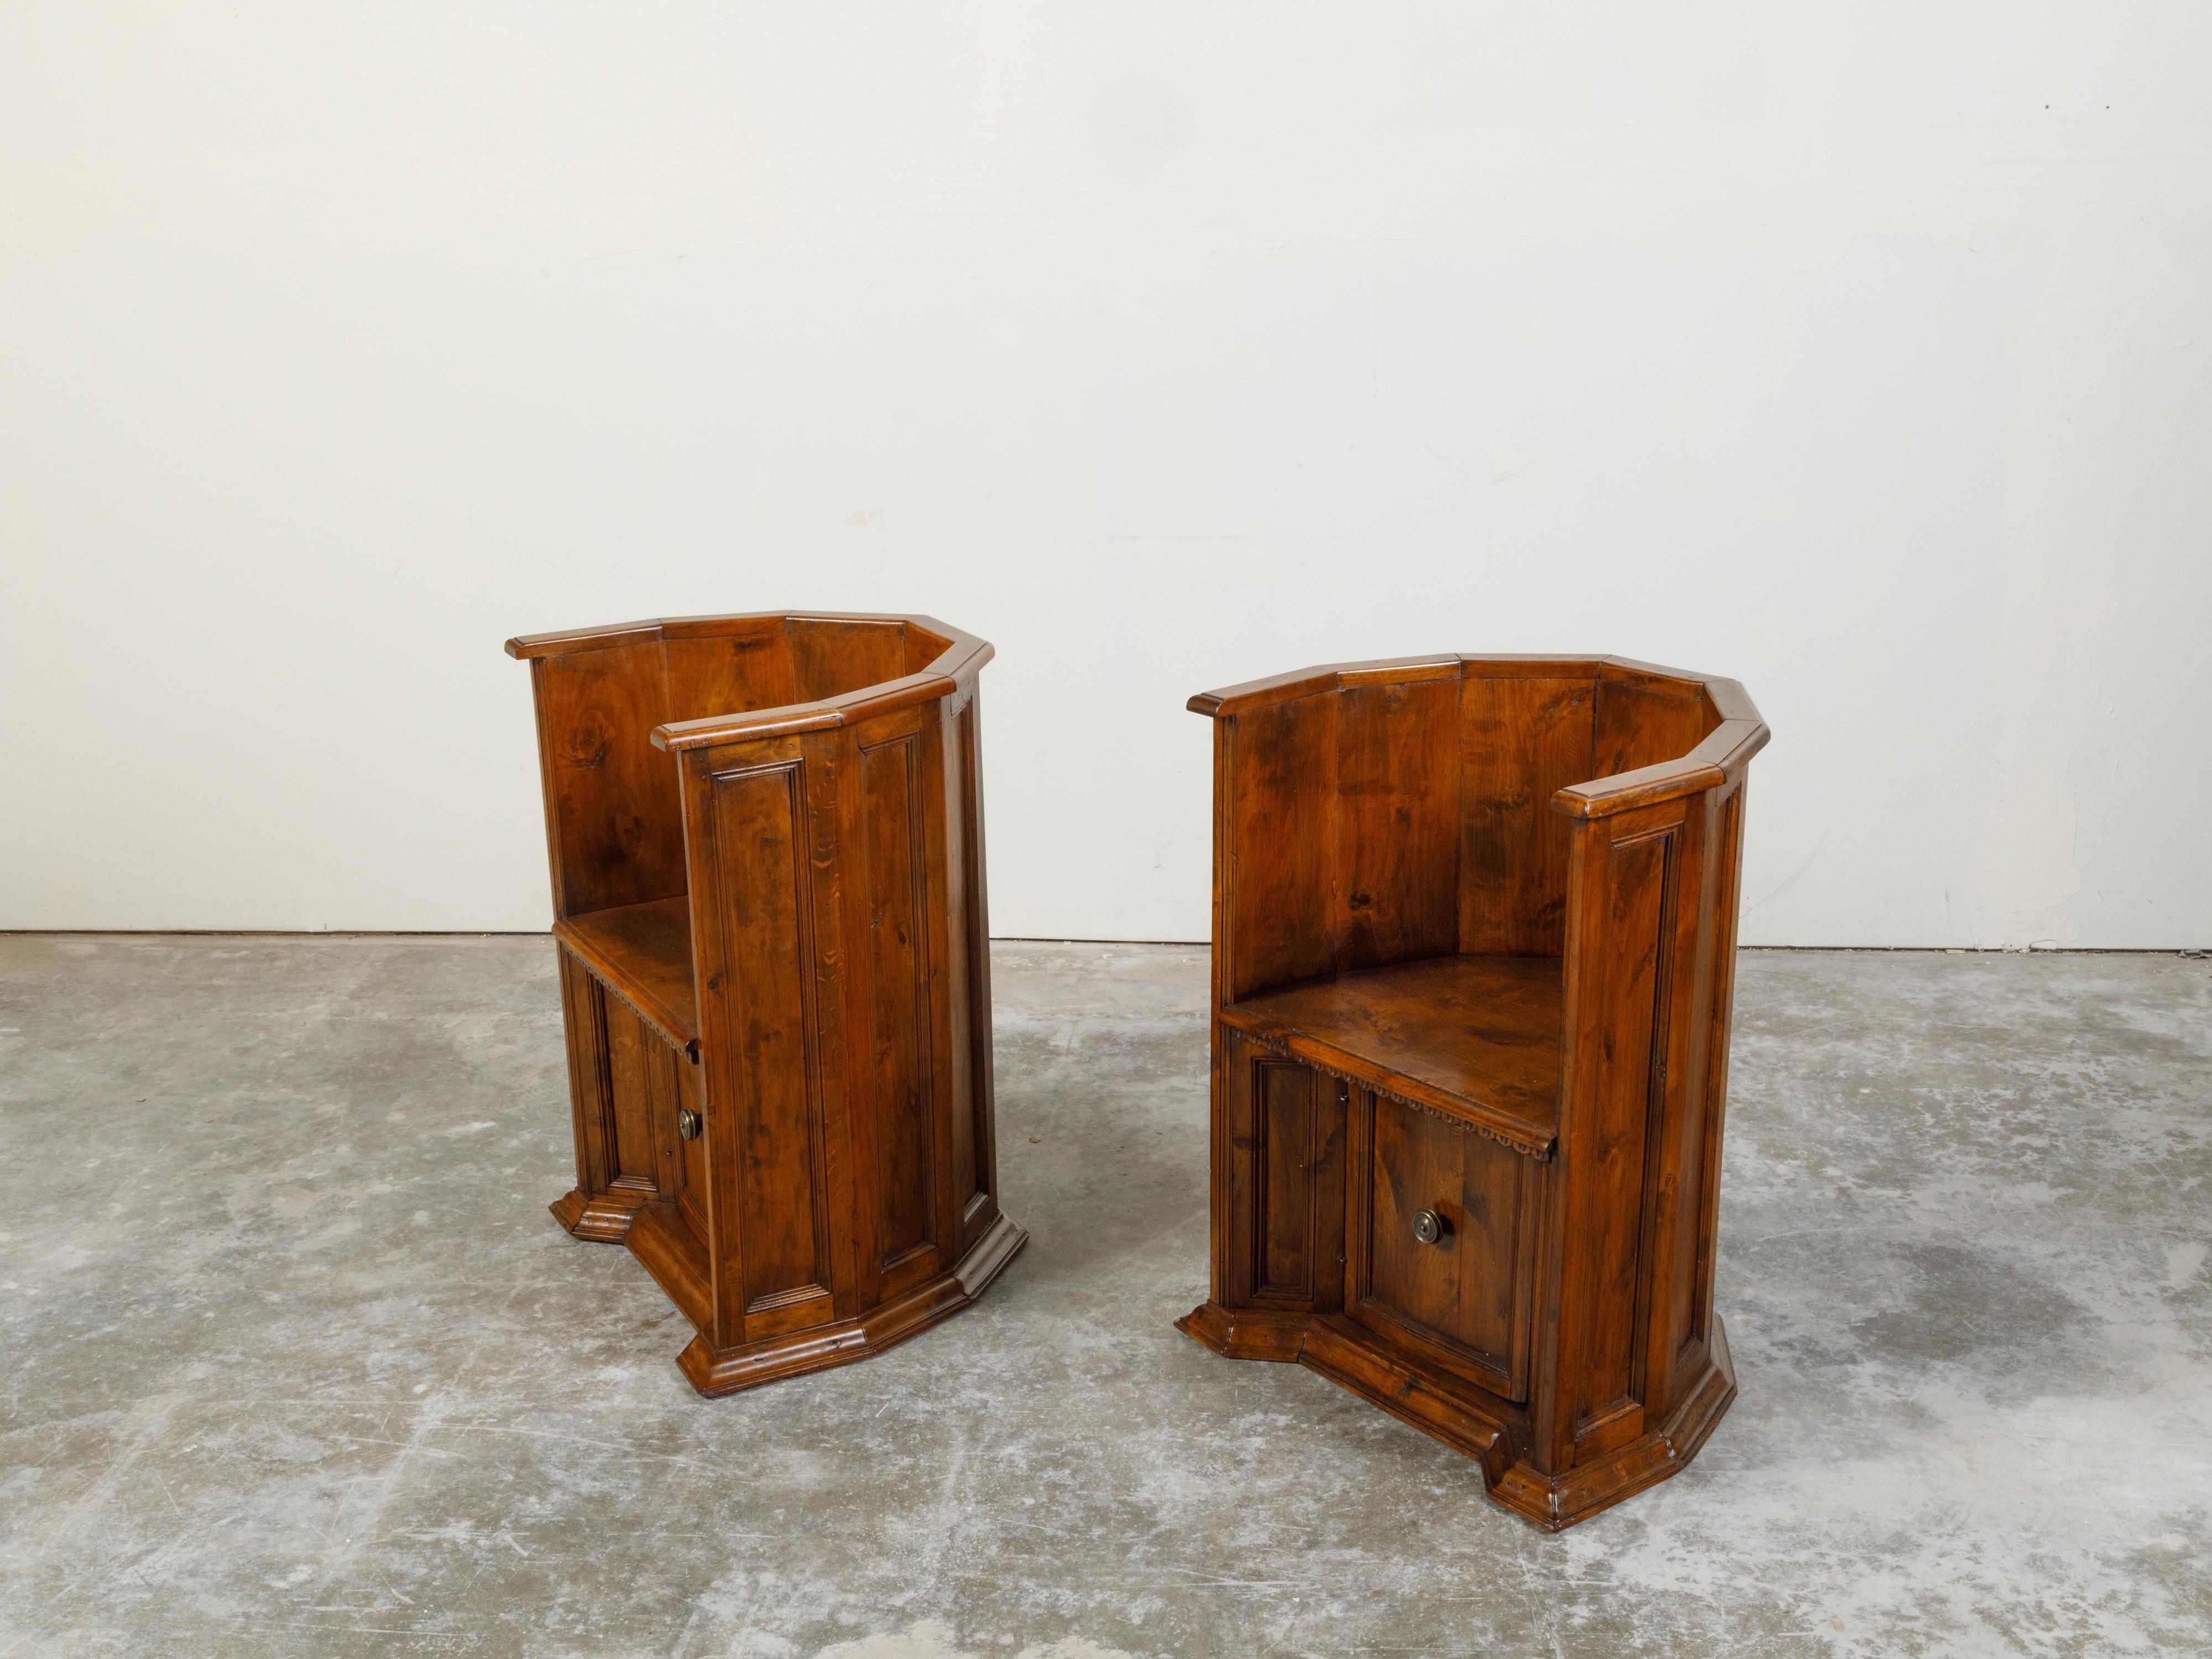 Pair of Italian 19th Century Renaissance Style Wooden Chairs with Lower Doors For Sale 1